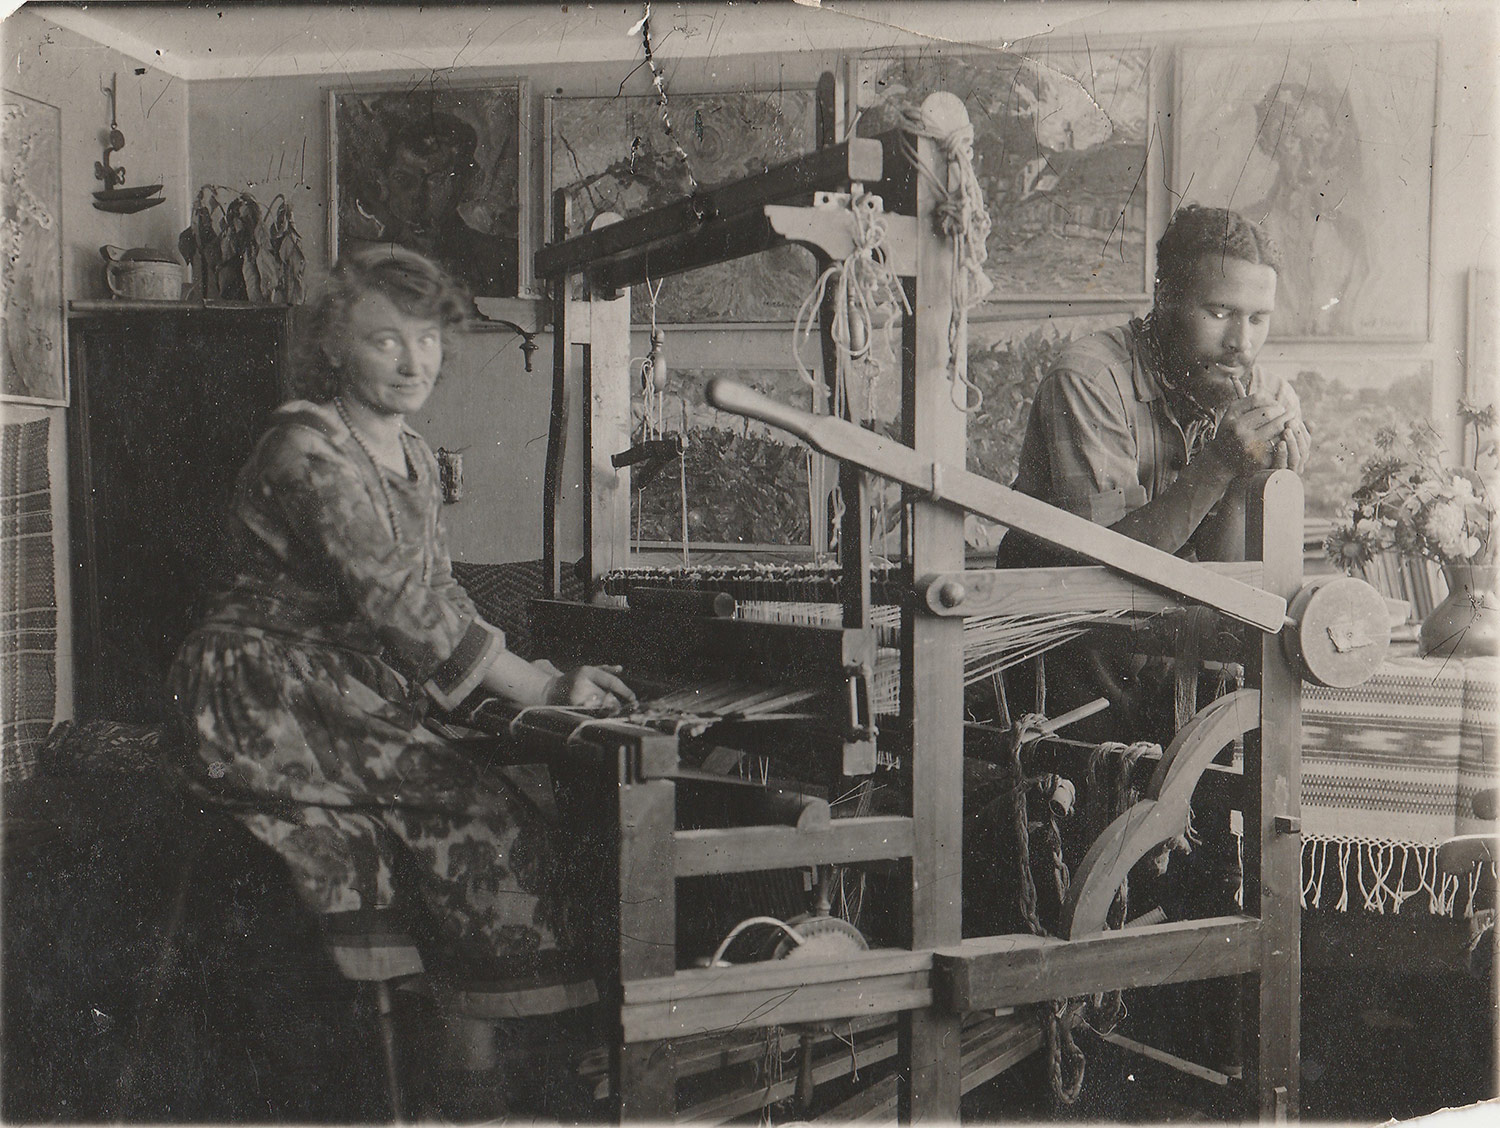 Photograph of William and Holcha Krake Johnson at their home studio in Kerteminde